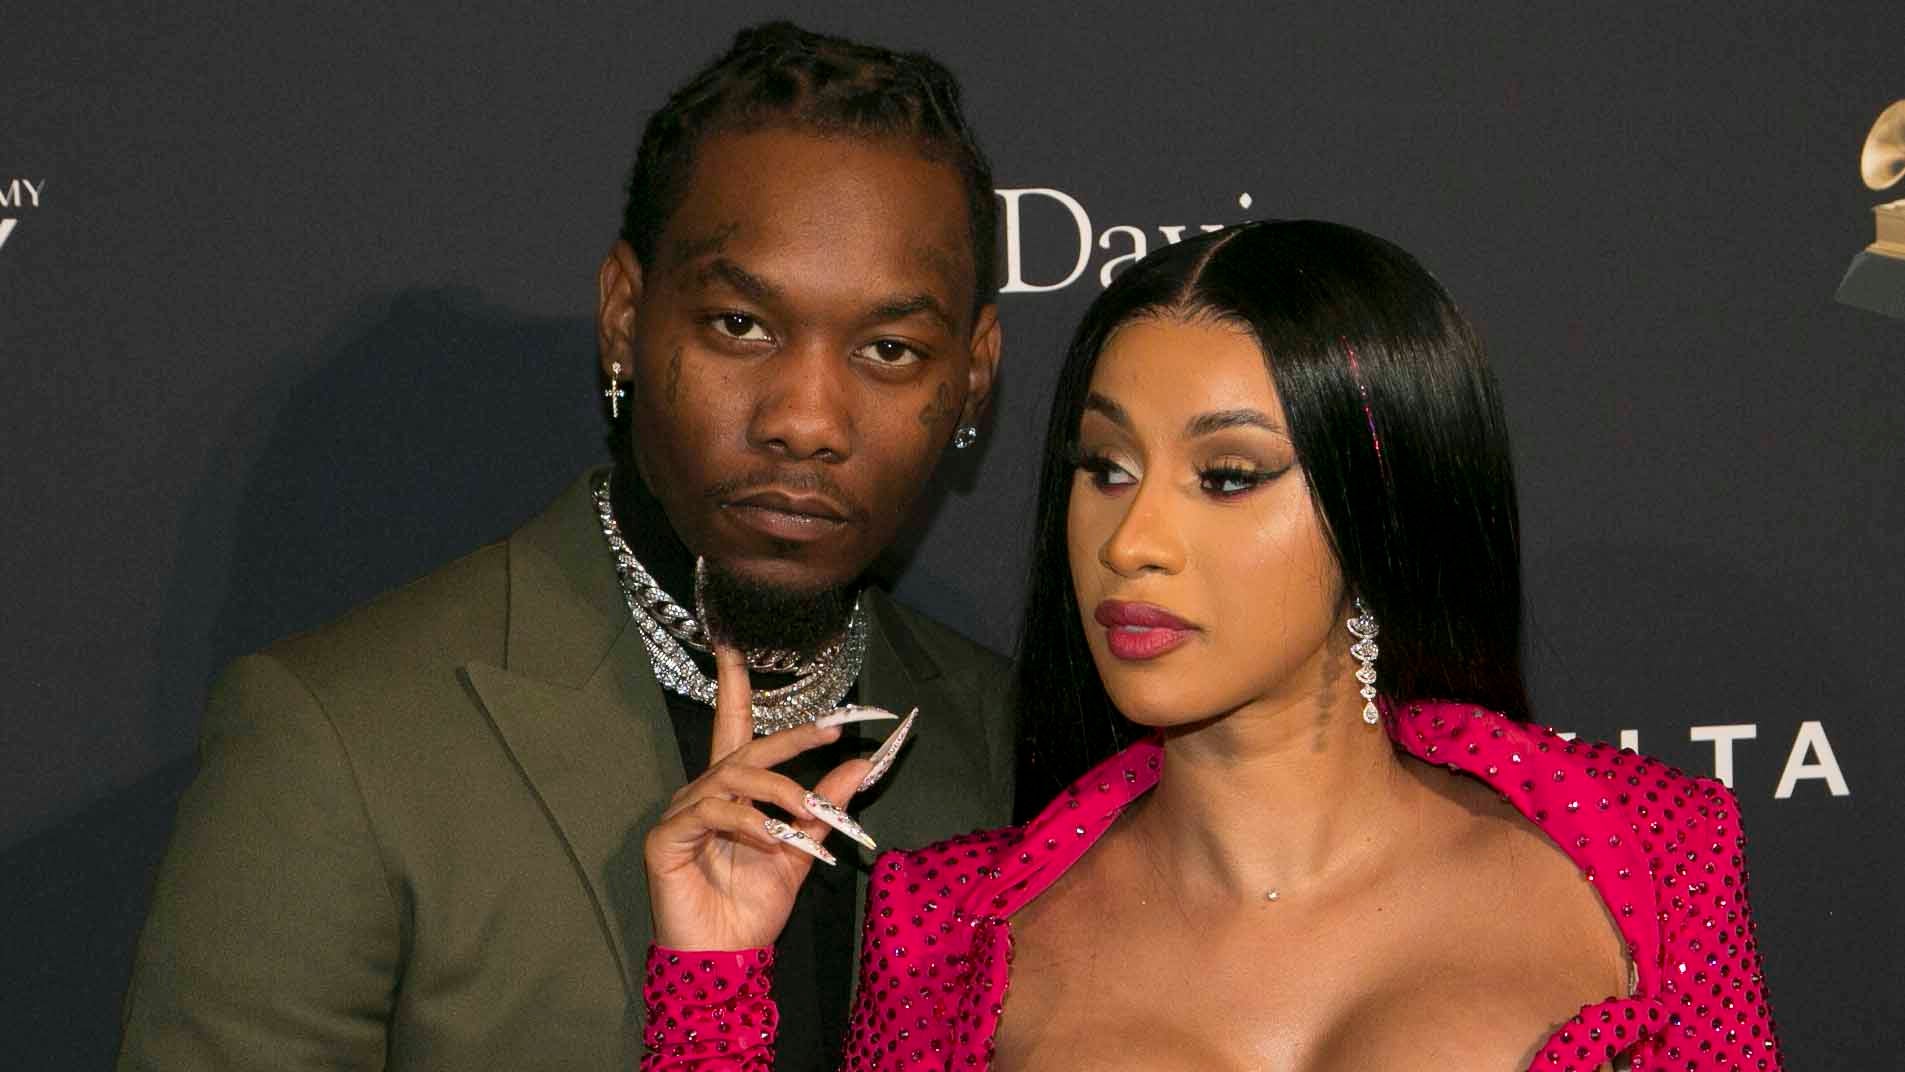 Raj Wap Com 16 18 Old School Girls Porn Vide - Cardi B and Offset: A Complete Timeline of Their Romance | Entertainment  Tonight